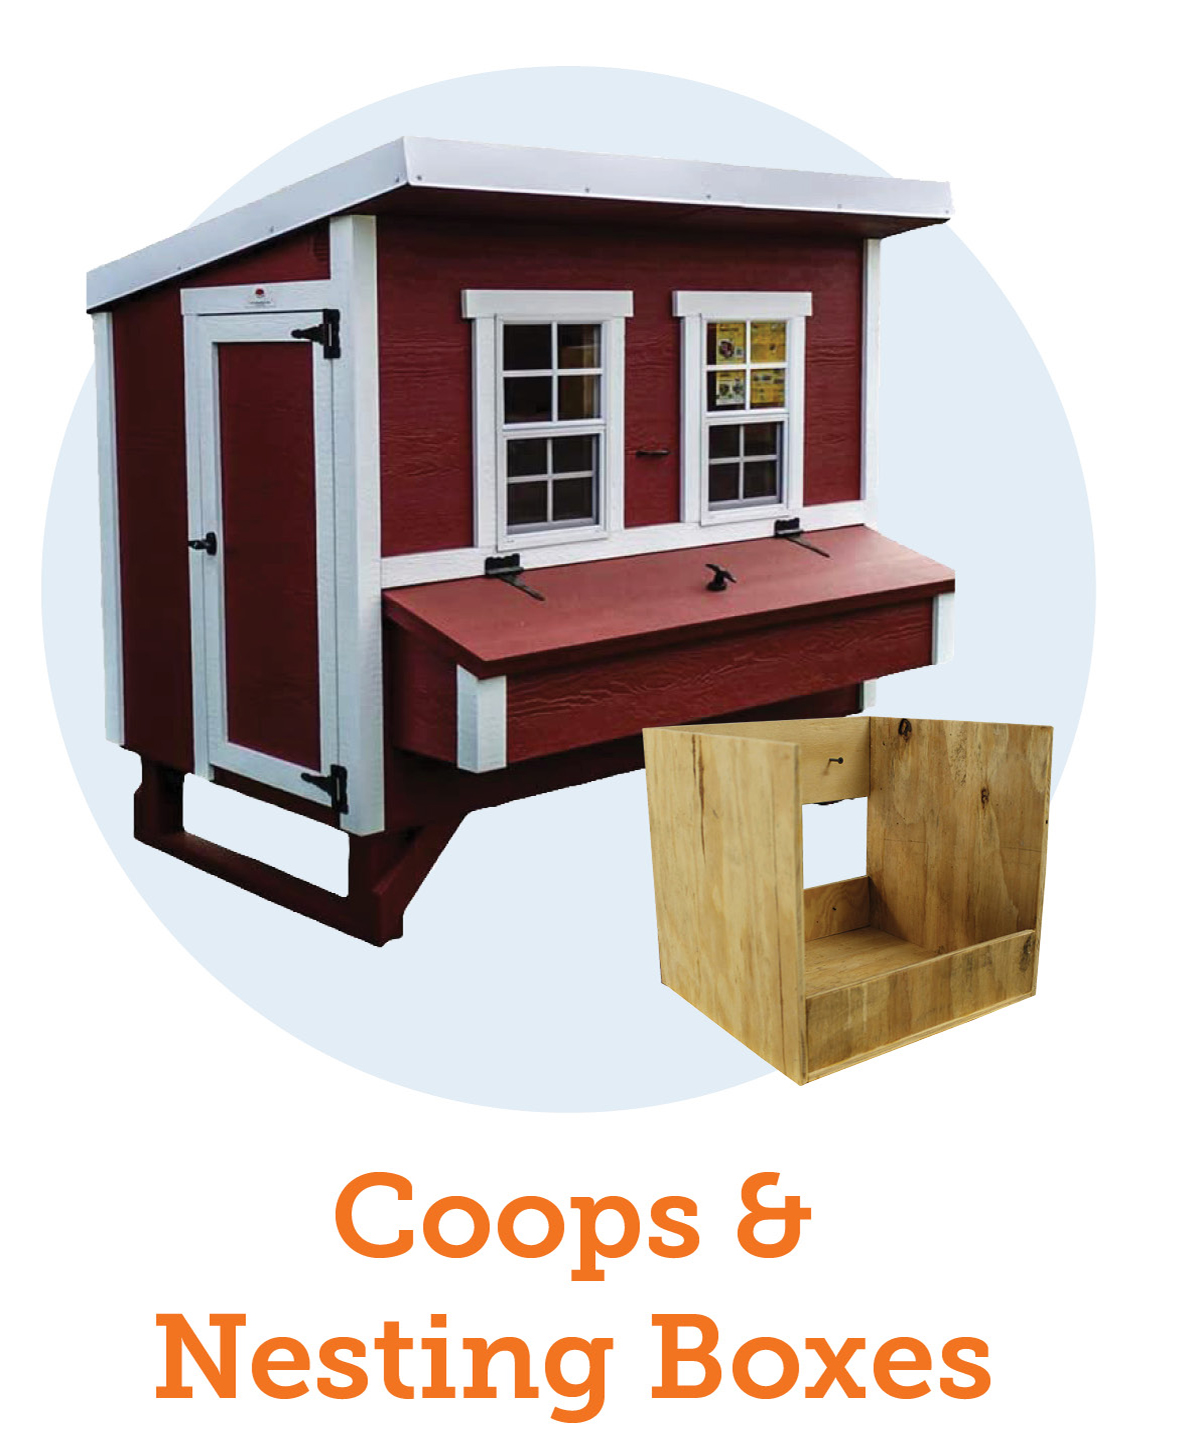 Shop by category, Coops & Nesting Boxes, Opens in new window.